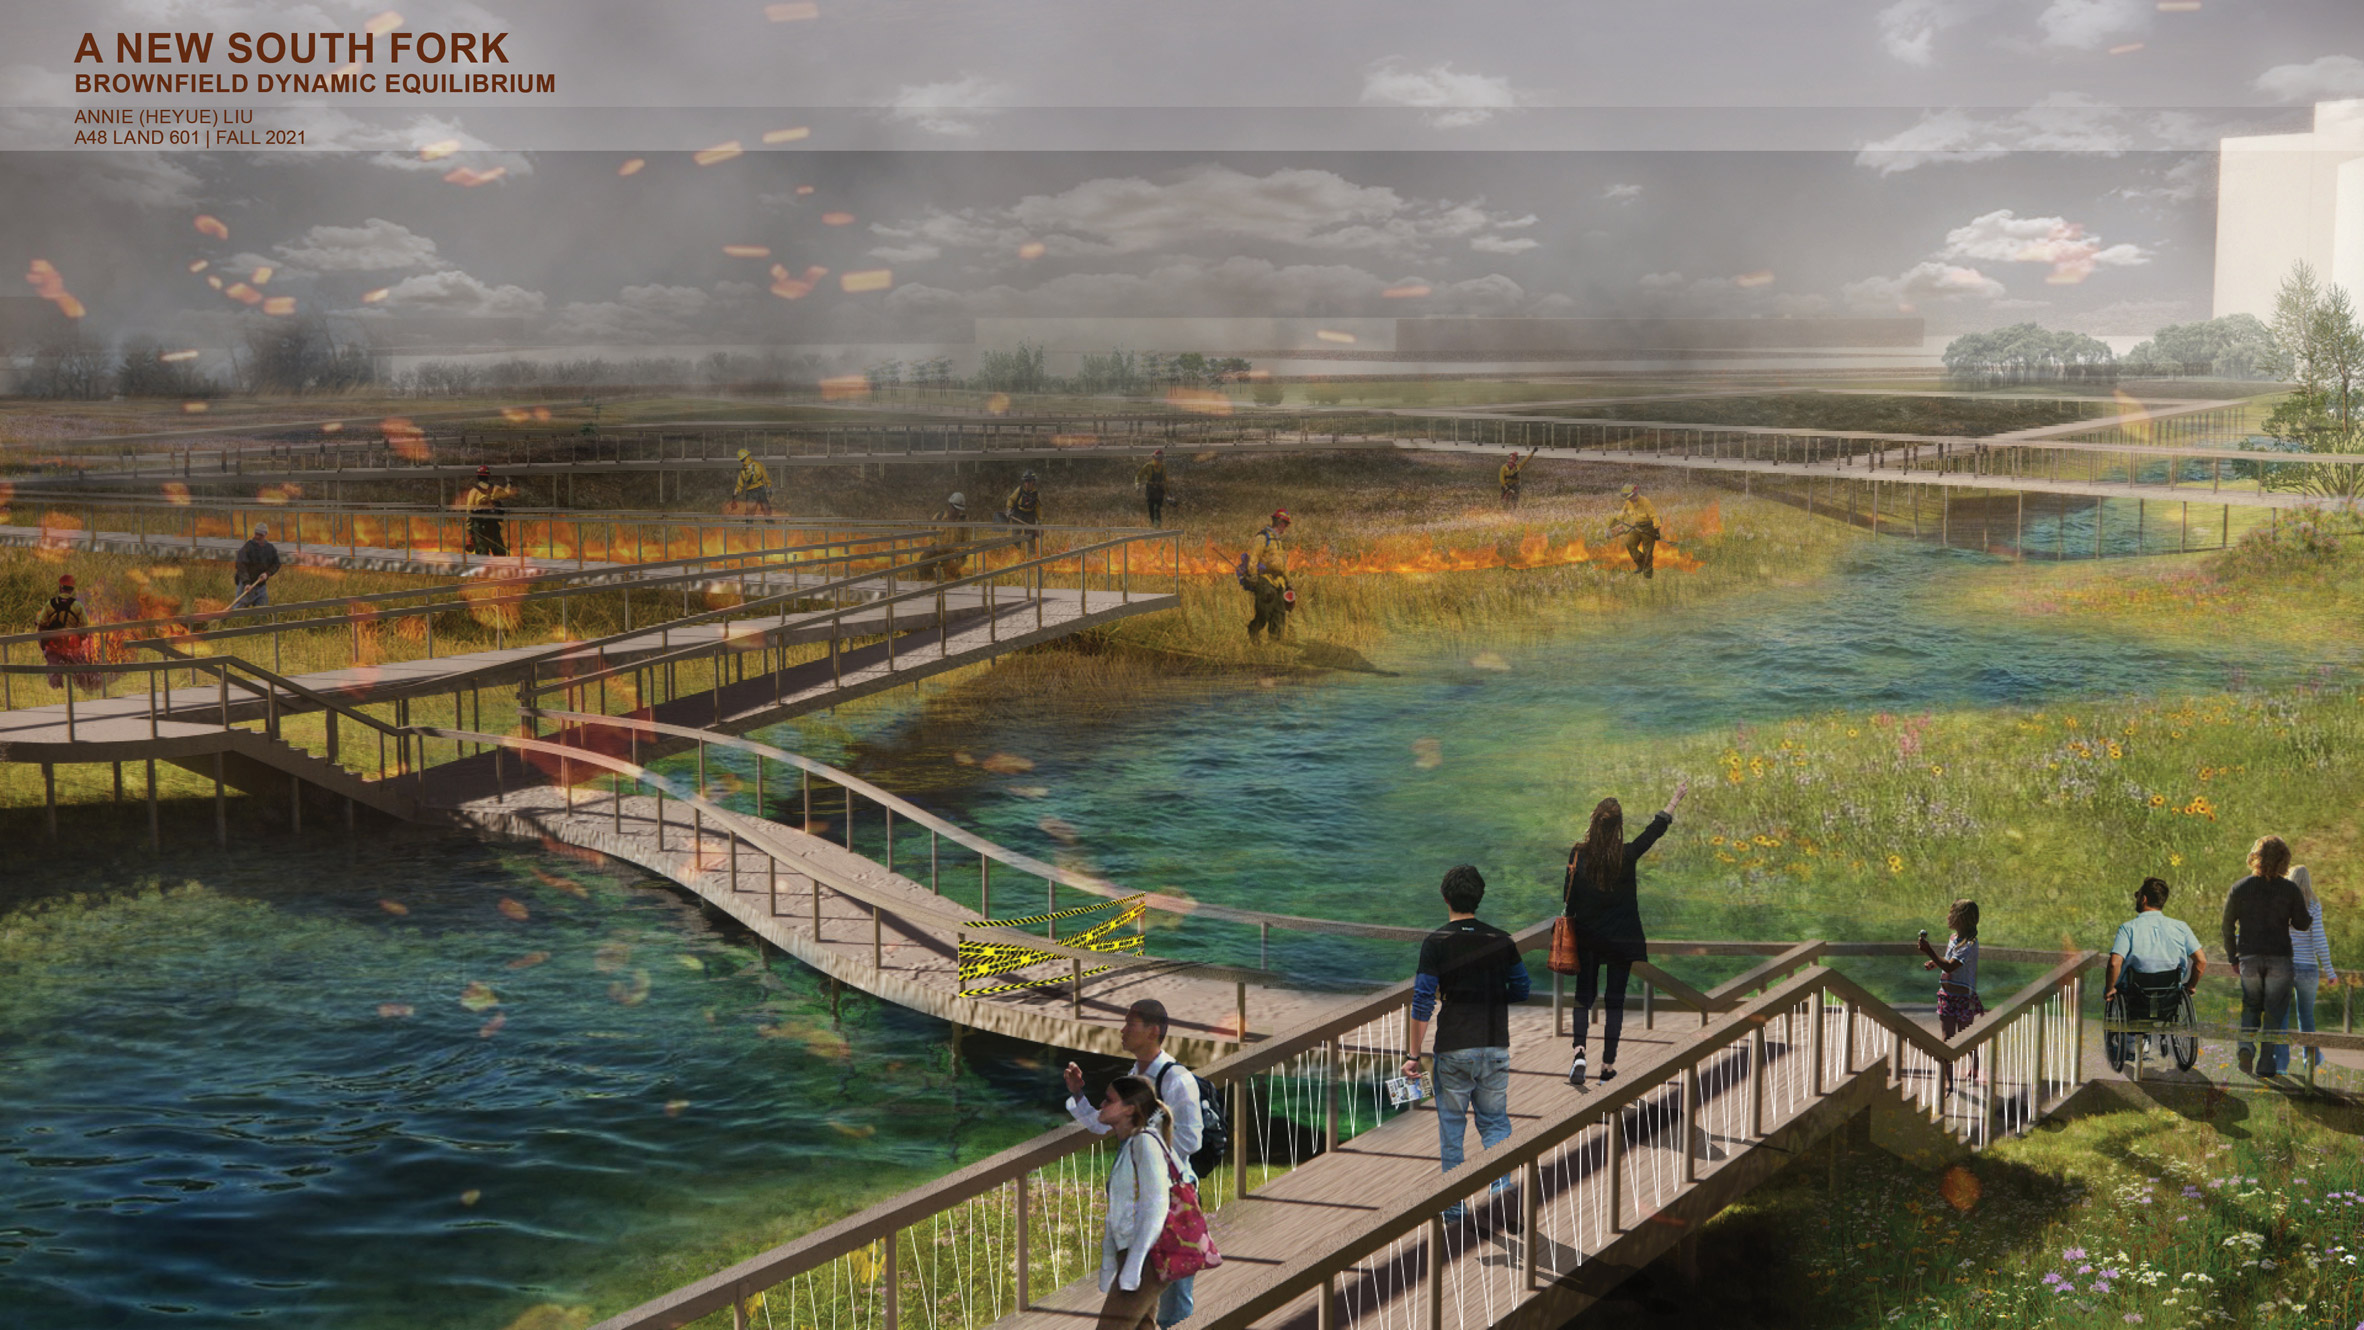 Render of people on a wooden bridge over water and grassy areas